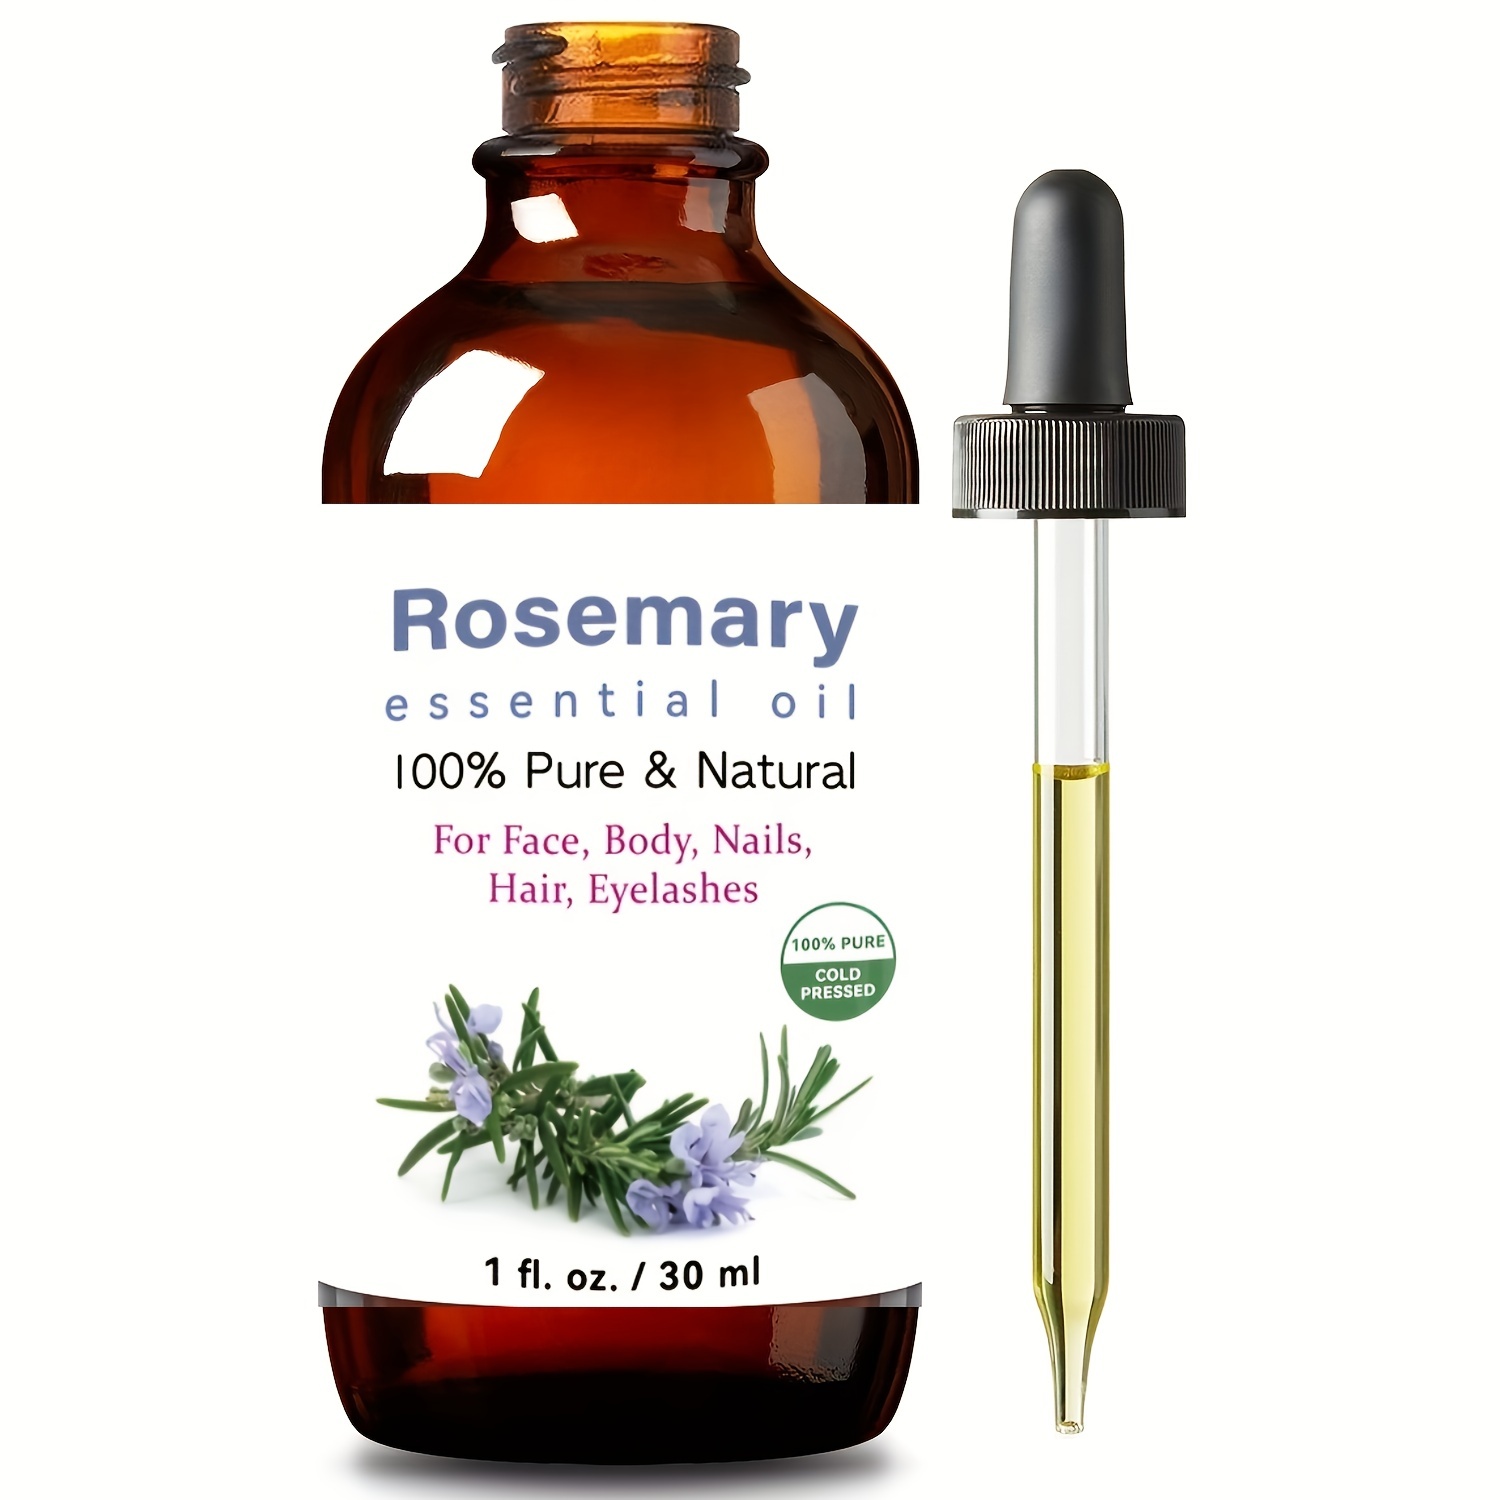 1.01oz Rosemary Essential Oil And Carrier Oil For Body Care And Hair Growth  - Moisturizing Massage Oil For Aromatherapy ！